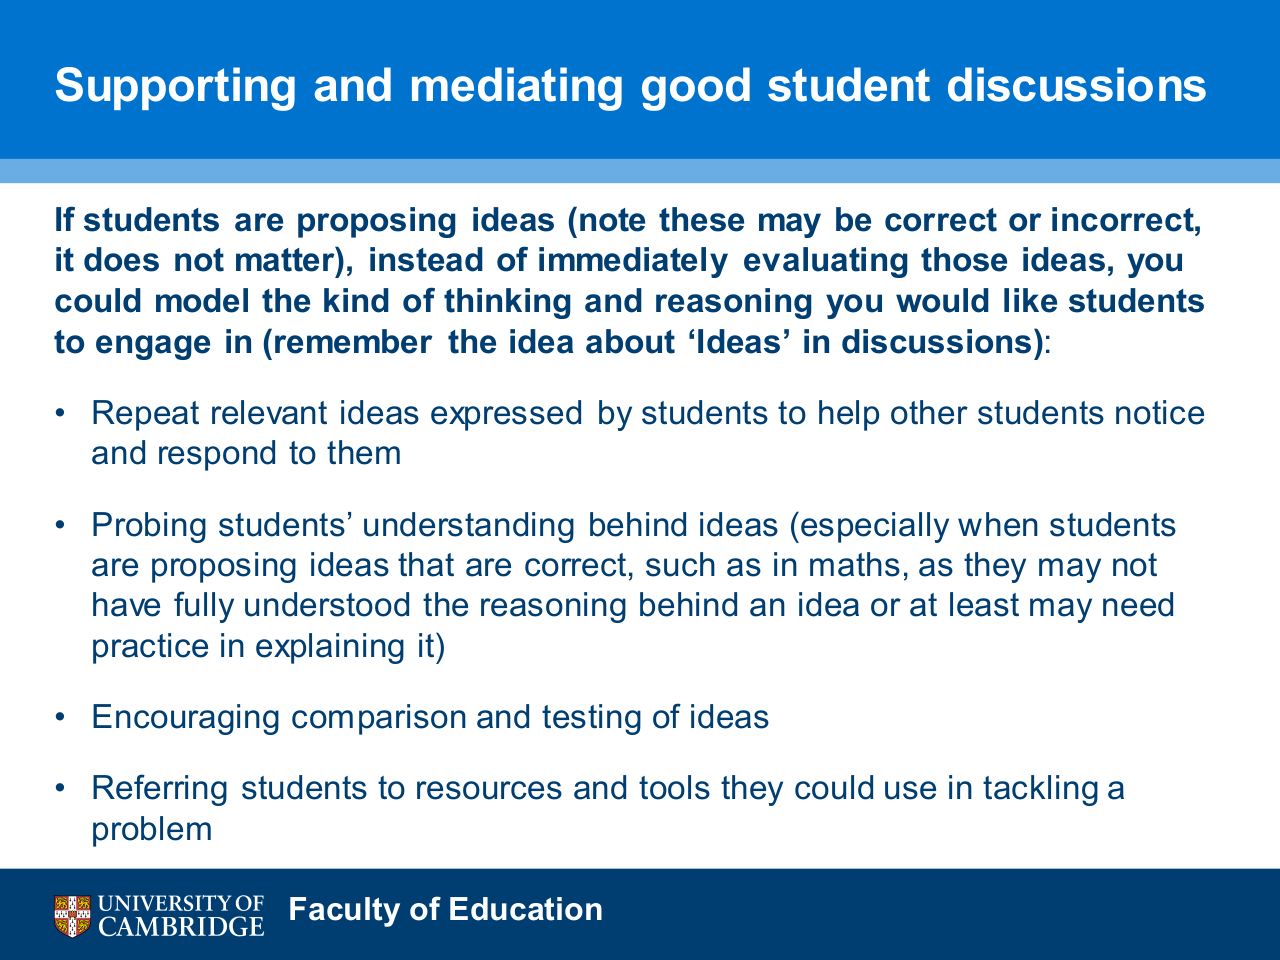 Supporting and mediating good student discussions. If students are proposing ideas (note these may be correct or incorrect, it does not matter), instead of immediately evaluating those ideas, you could model the kind of thinking and reasoning you would like students to engage in (remember the idea about 'Ideas' in discussions): Repeat relevant ideas expressed by students to help other students notice and respond to them; Probing students' understanding behind ideas (especially when students are proposing ideas that are correct, such as in maths, as they may not have fully understood the reasoning behind an idea or at least may need practice in explaining it); Encouraging comparison and testing of ideas; Referring students to resources and tools they could use in tackling a problem.